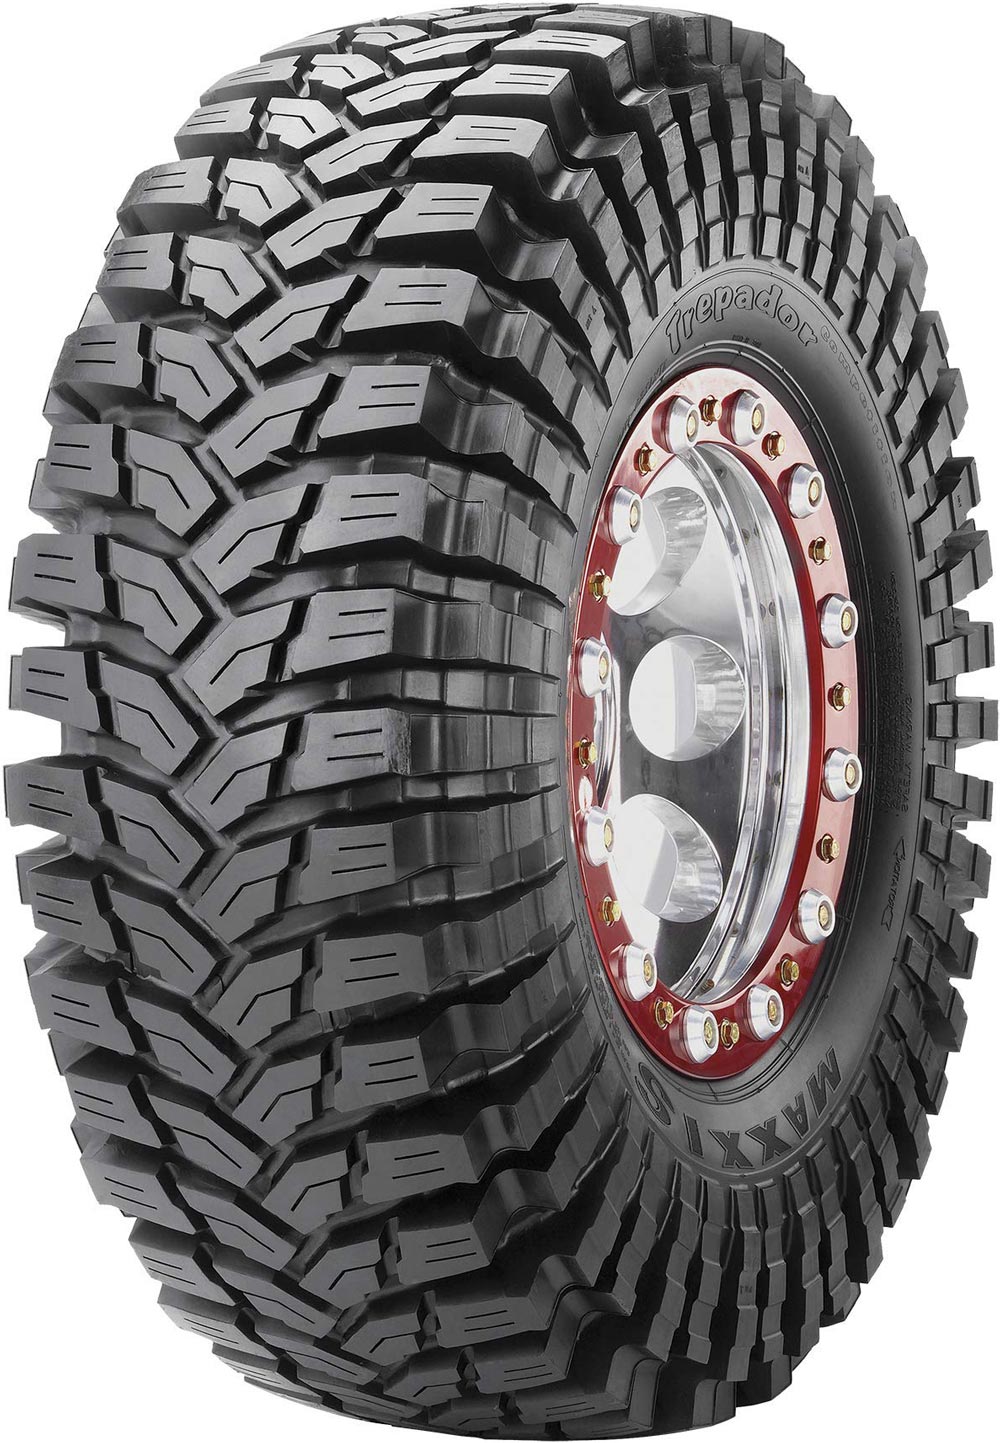 Джипови гуми MAXXIS M8060 COMPETITION YL 37/12.5 R16 124K